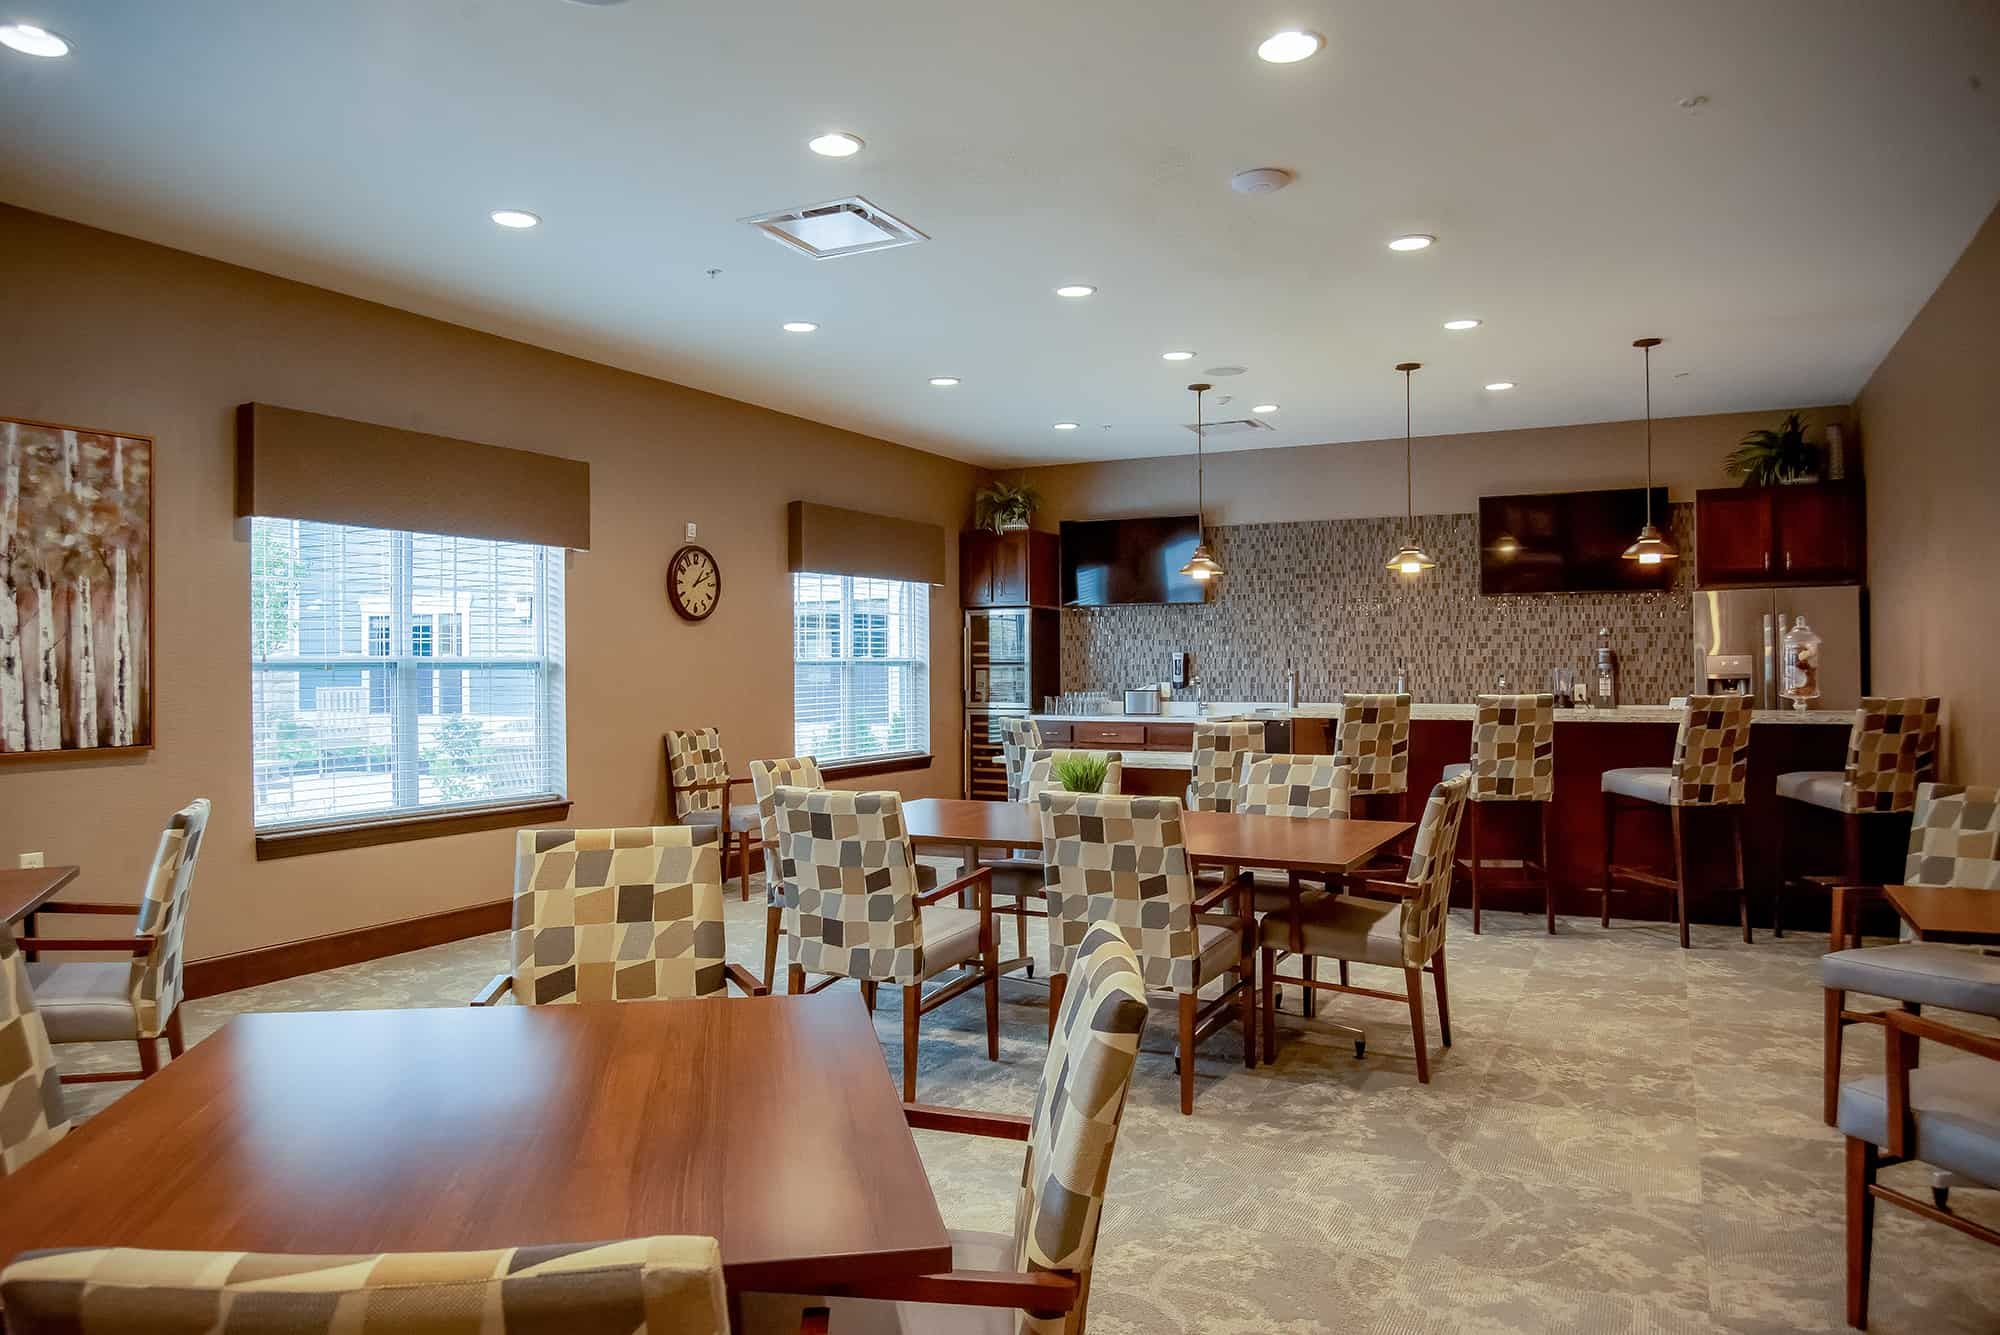 Interior view of Deerfield senior living community featuring dining room, lounge and home decor.